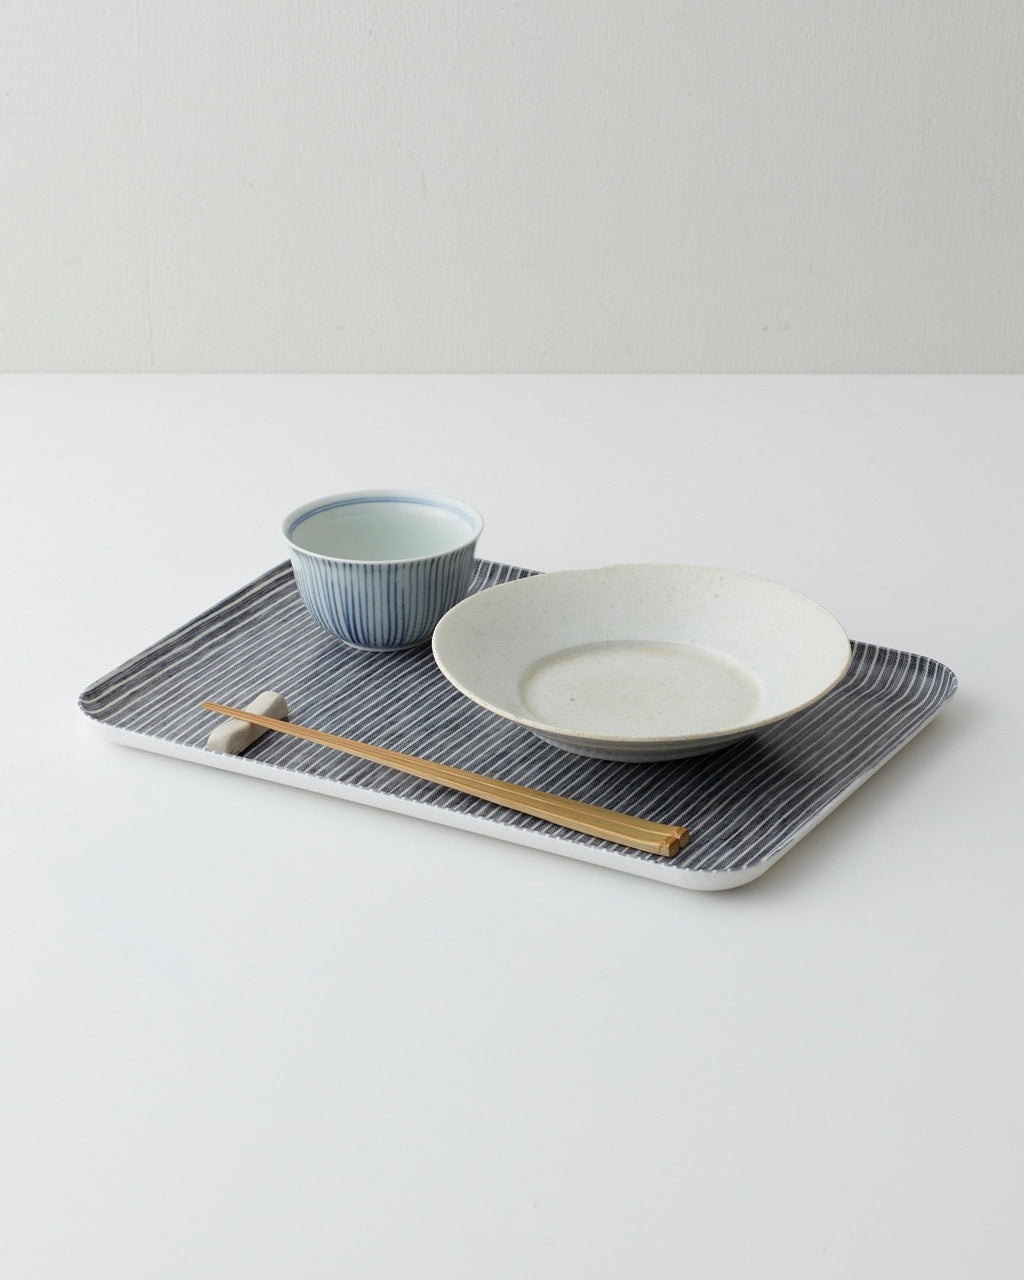 Pink Striped Linen Coated Tray by Fog Linen Work – The Kitsune & Co.